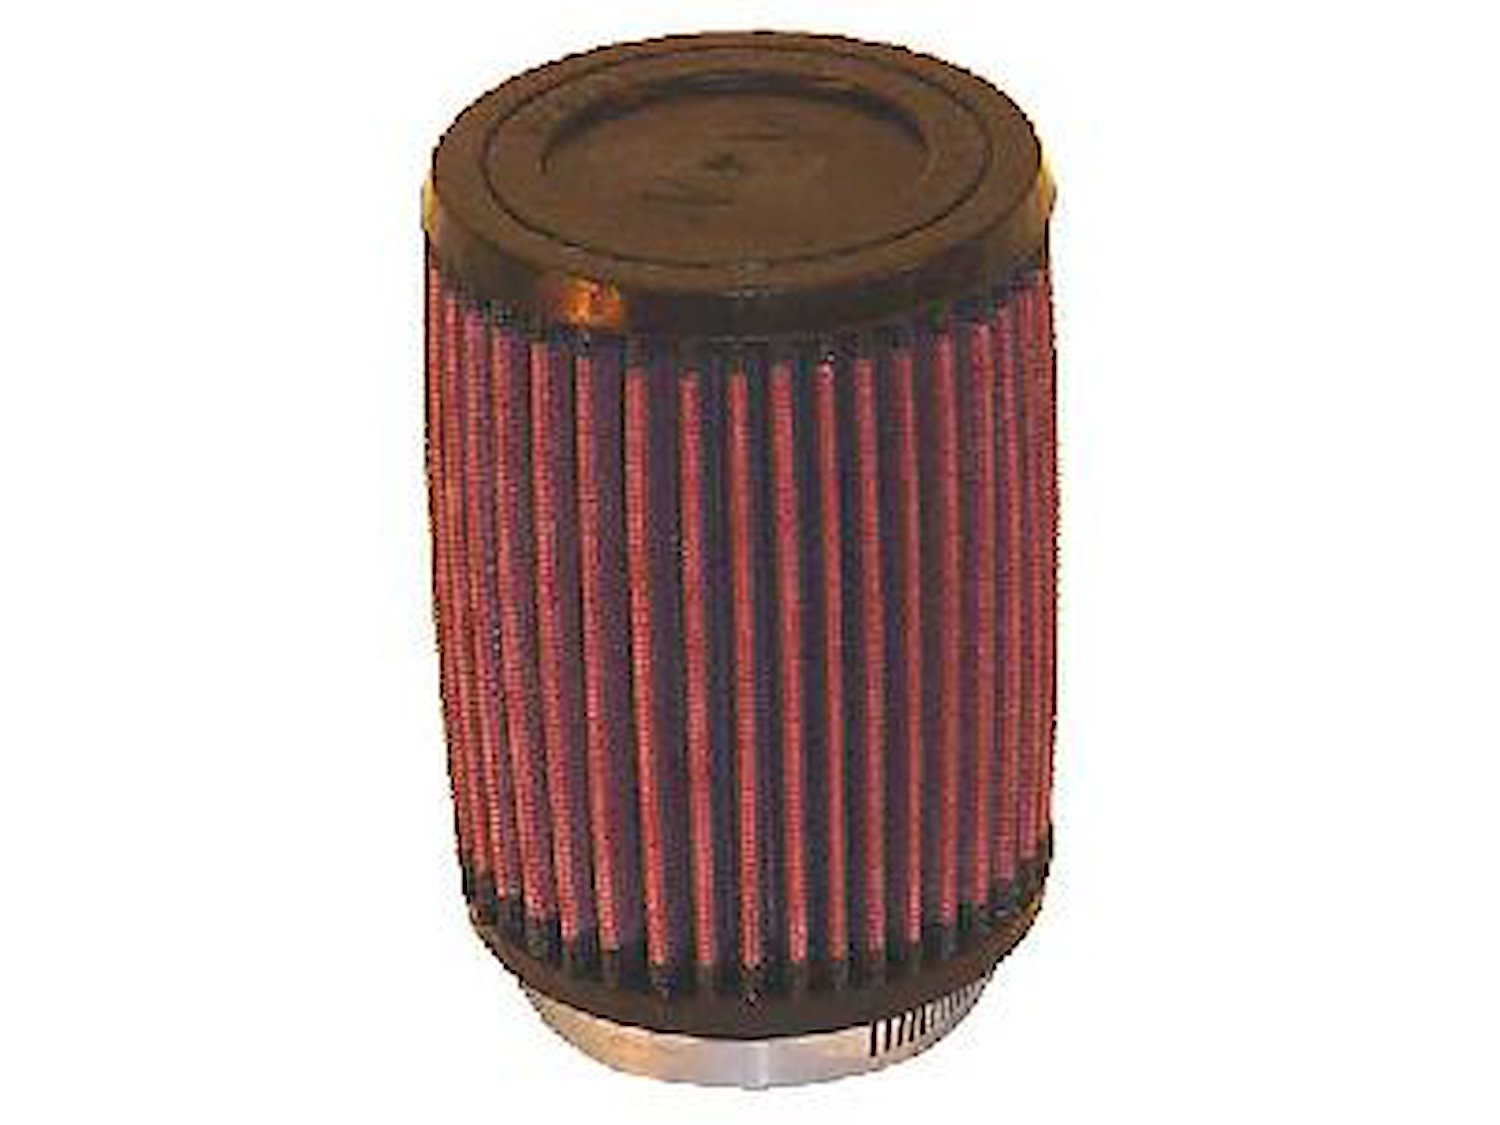 Round Straight Air Filter Flange Dia. (F): 2.875" (73 mm)